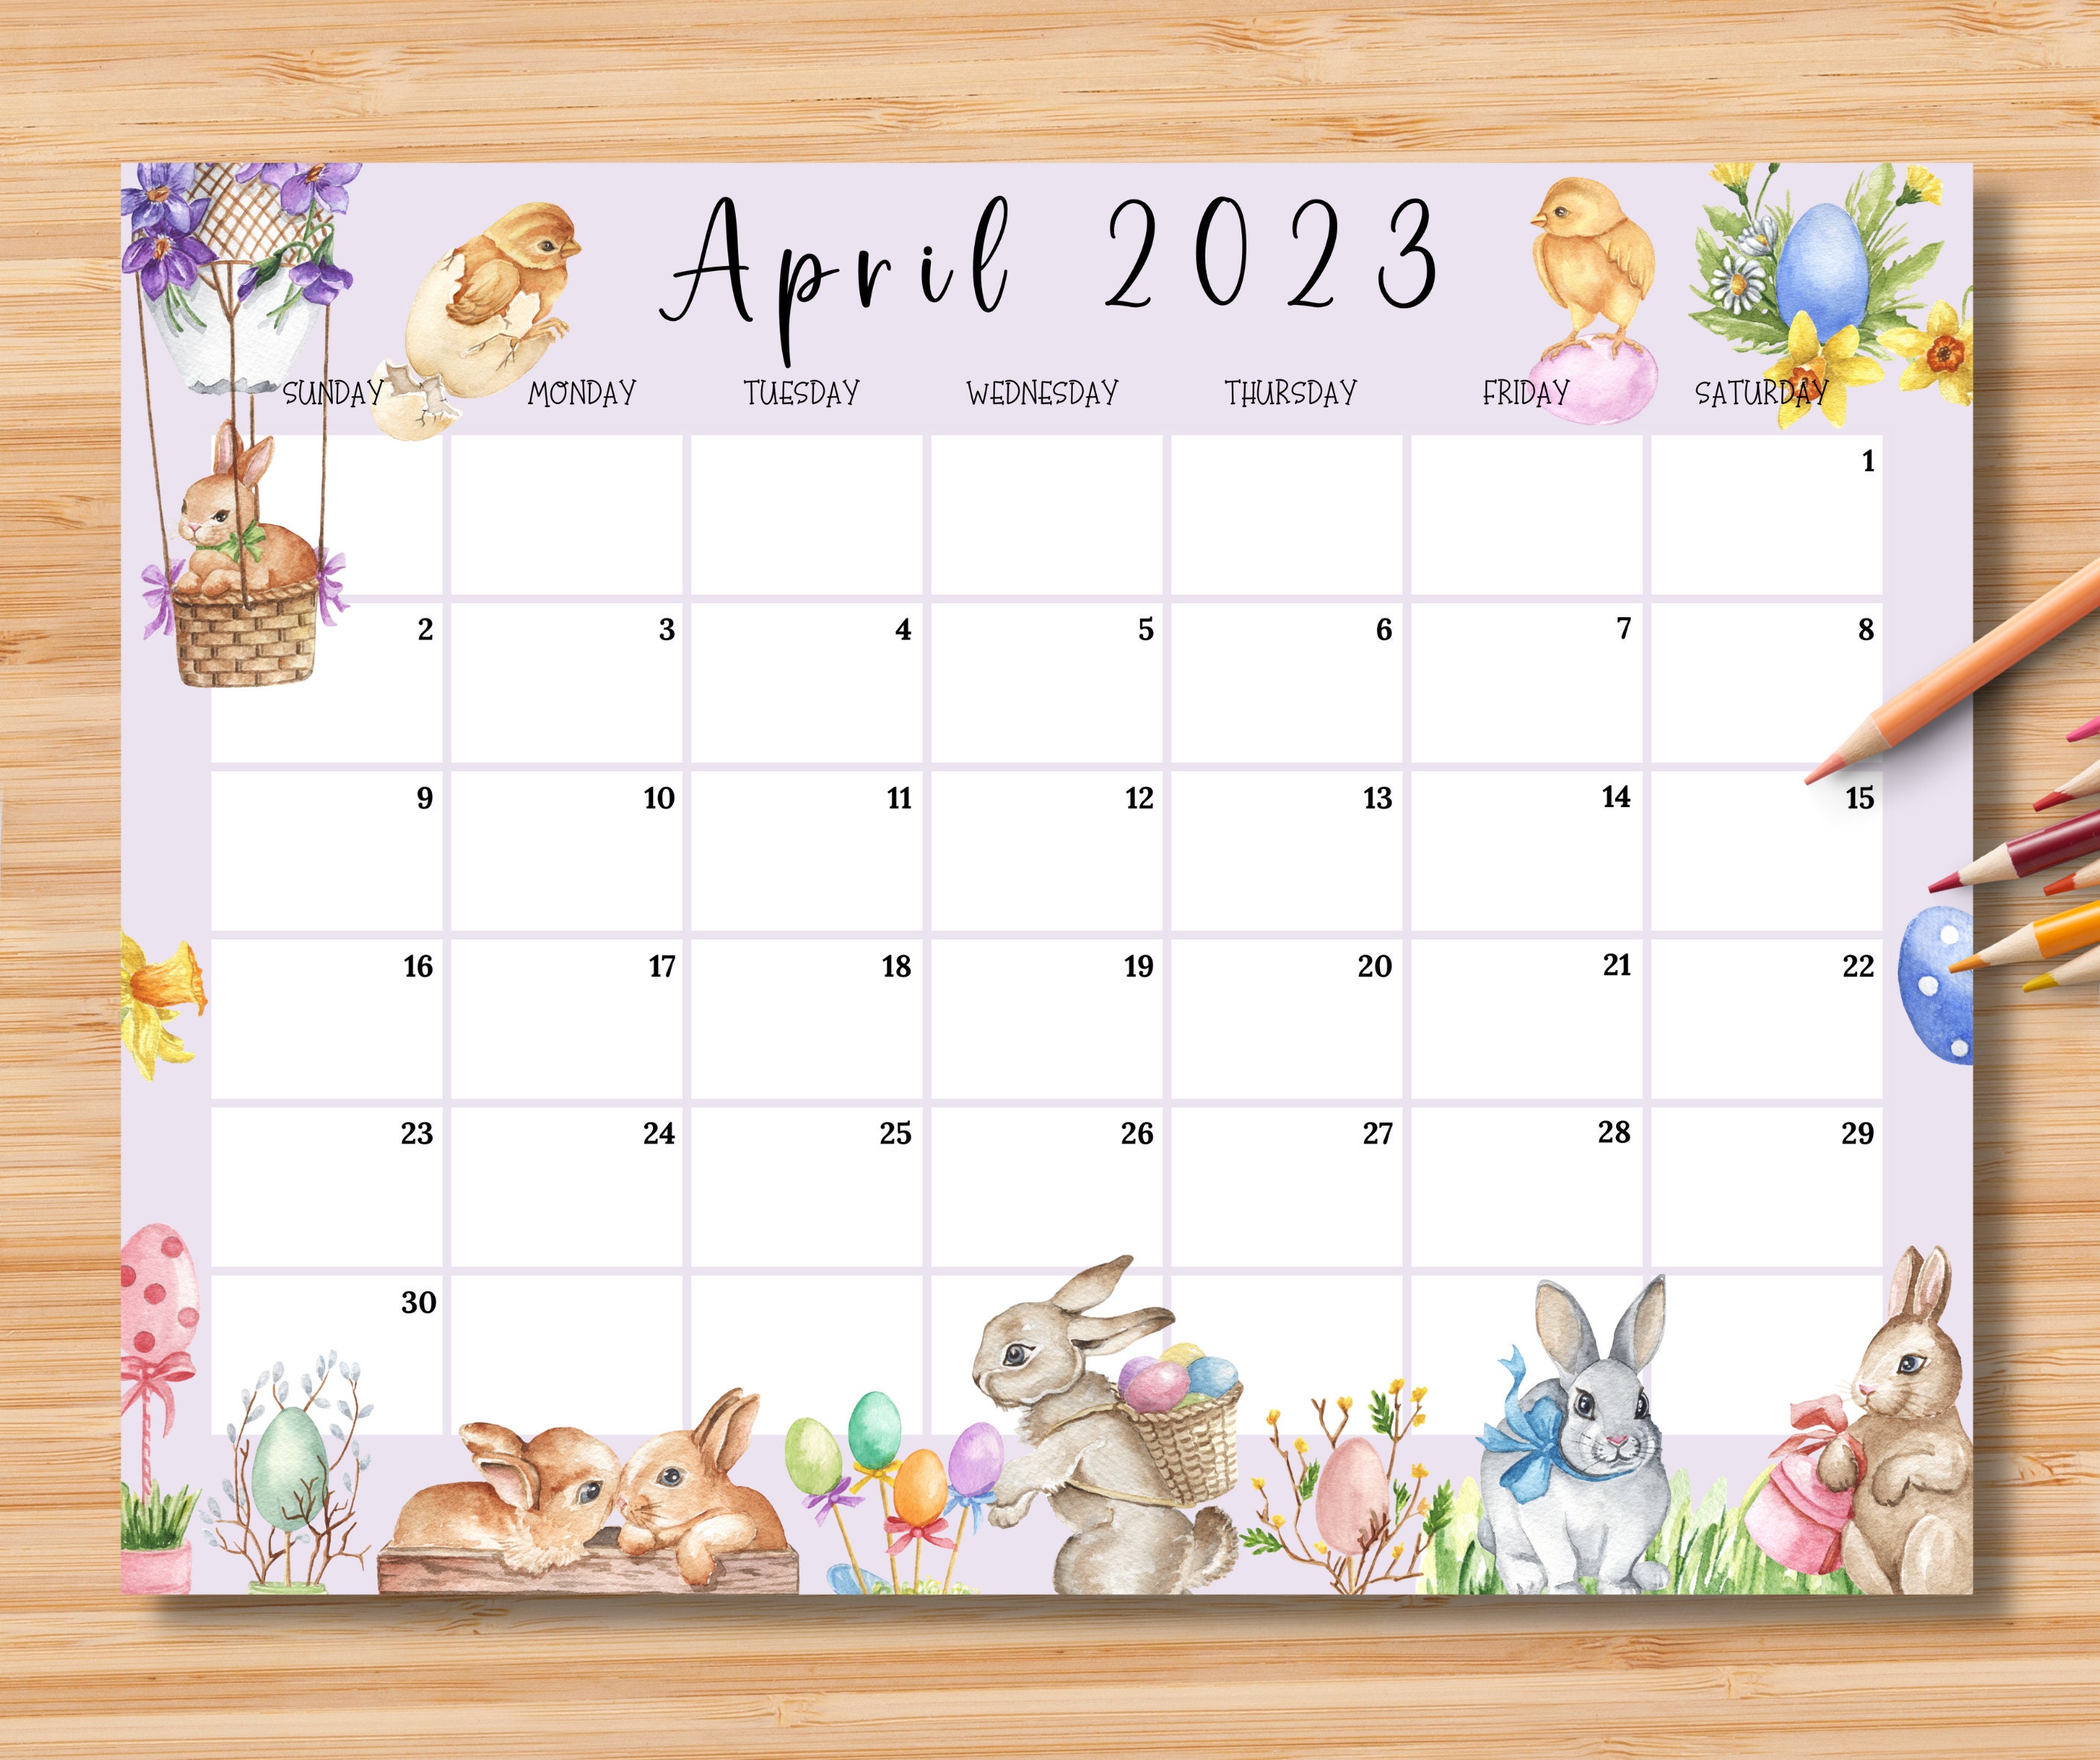 EDITABLE April 2023 Calendar Happy Easter Day 2023 With Cute Etsy